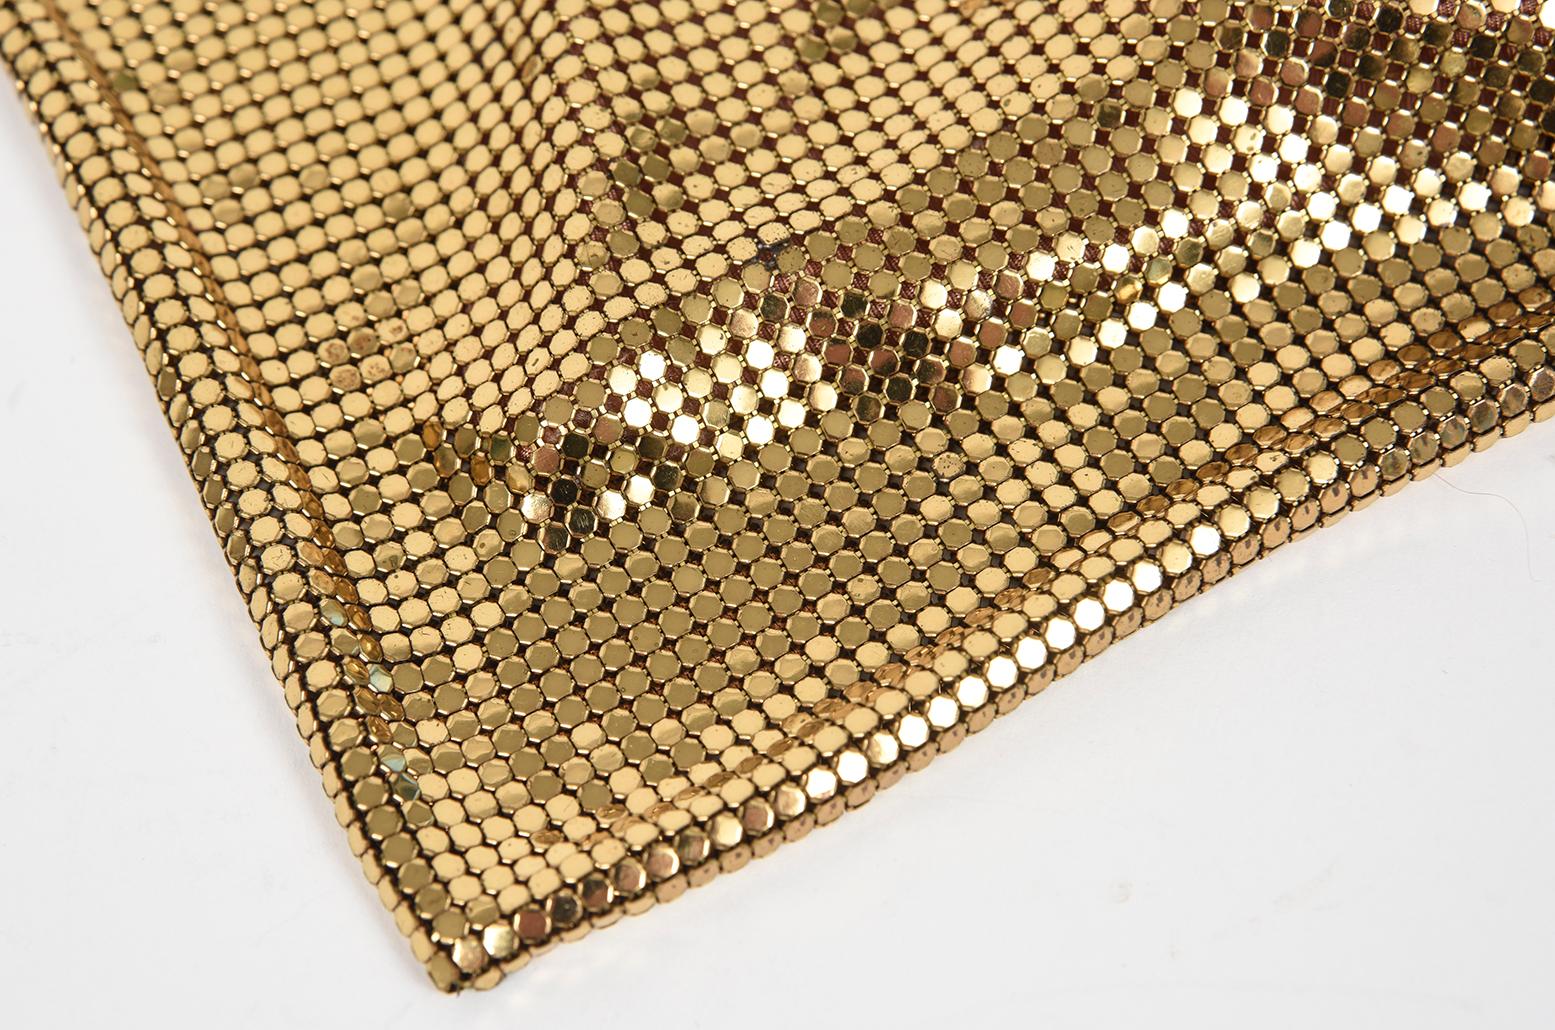 Whiting & Davis Figural Face Flower Frame Mesh Chainmail Gold Purse Evening Bag In Good Condition For Sale In Miami Beach, FL